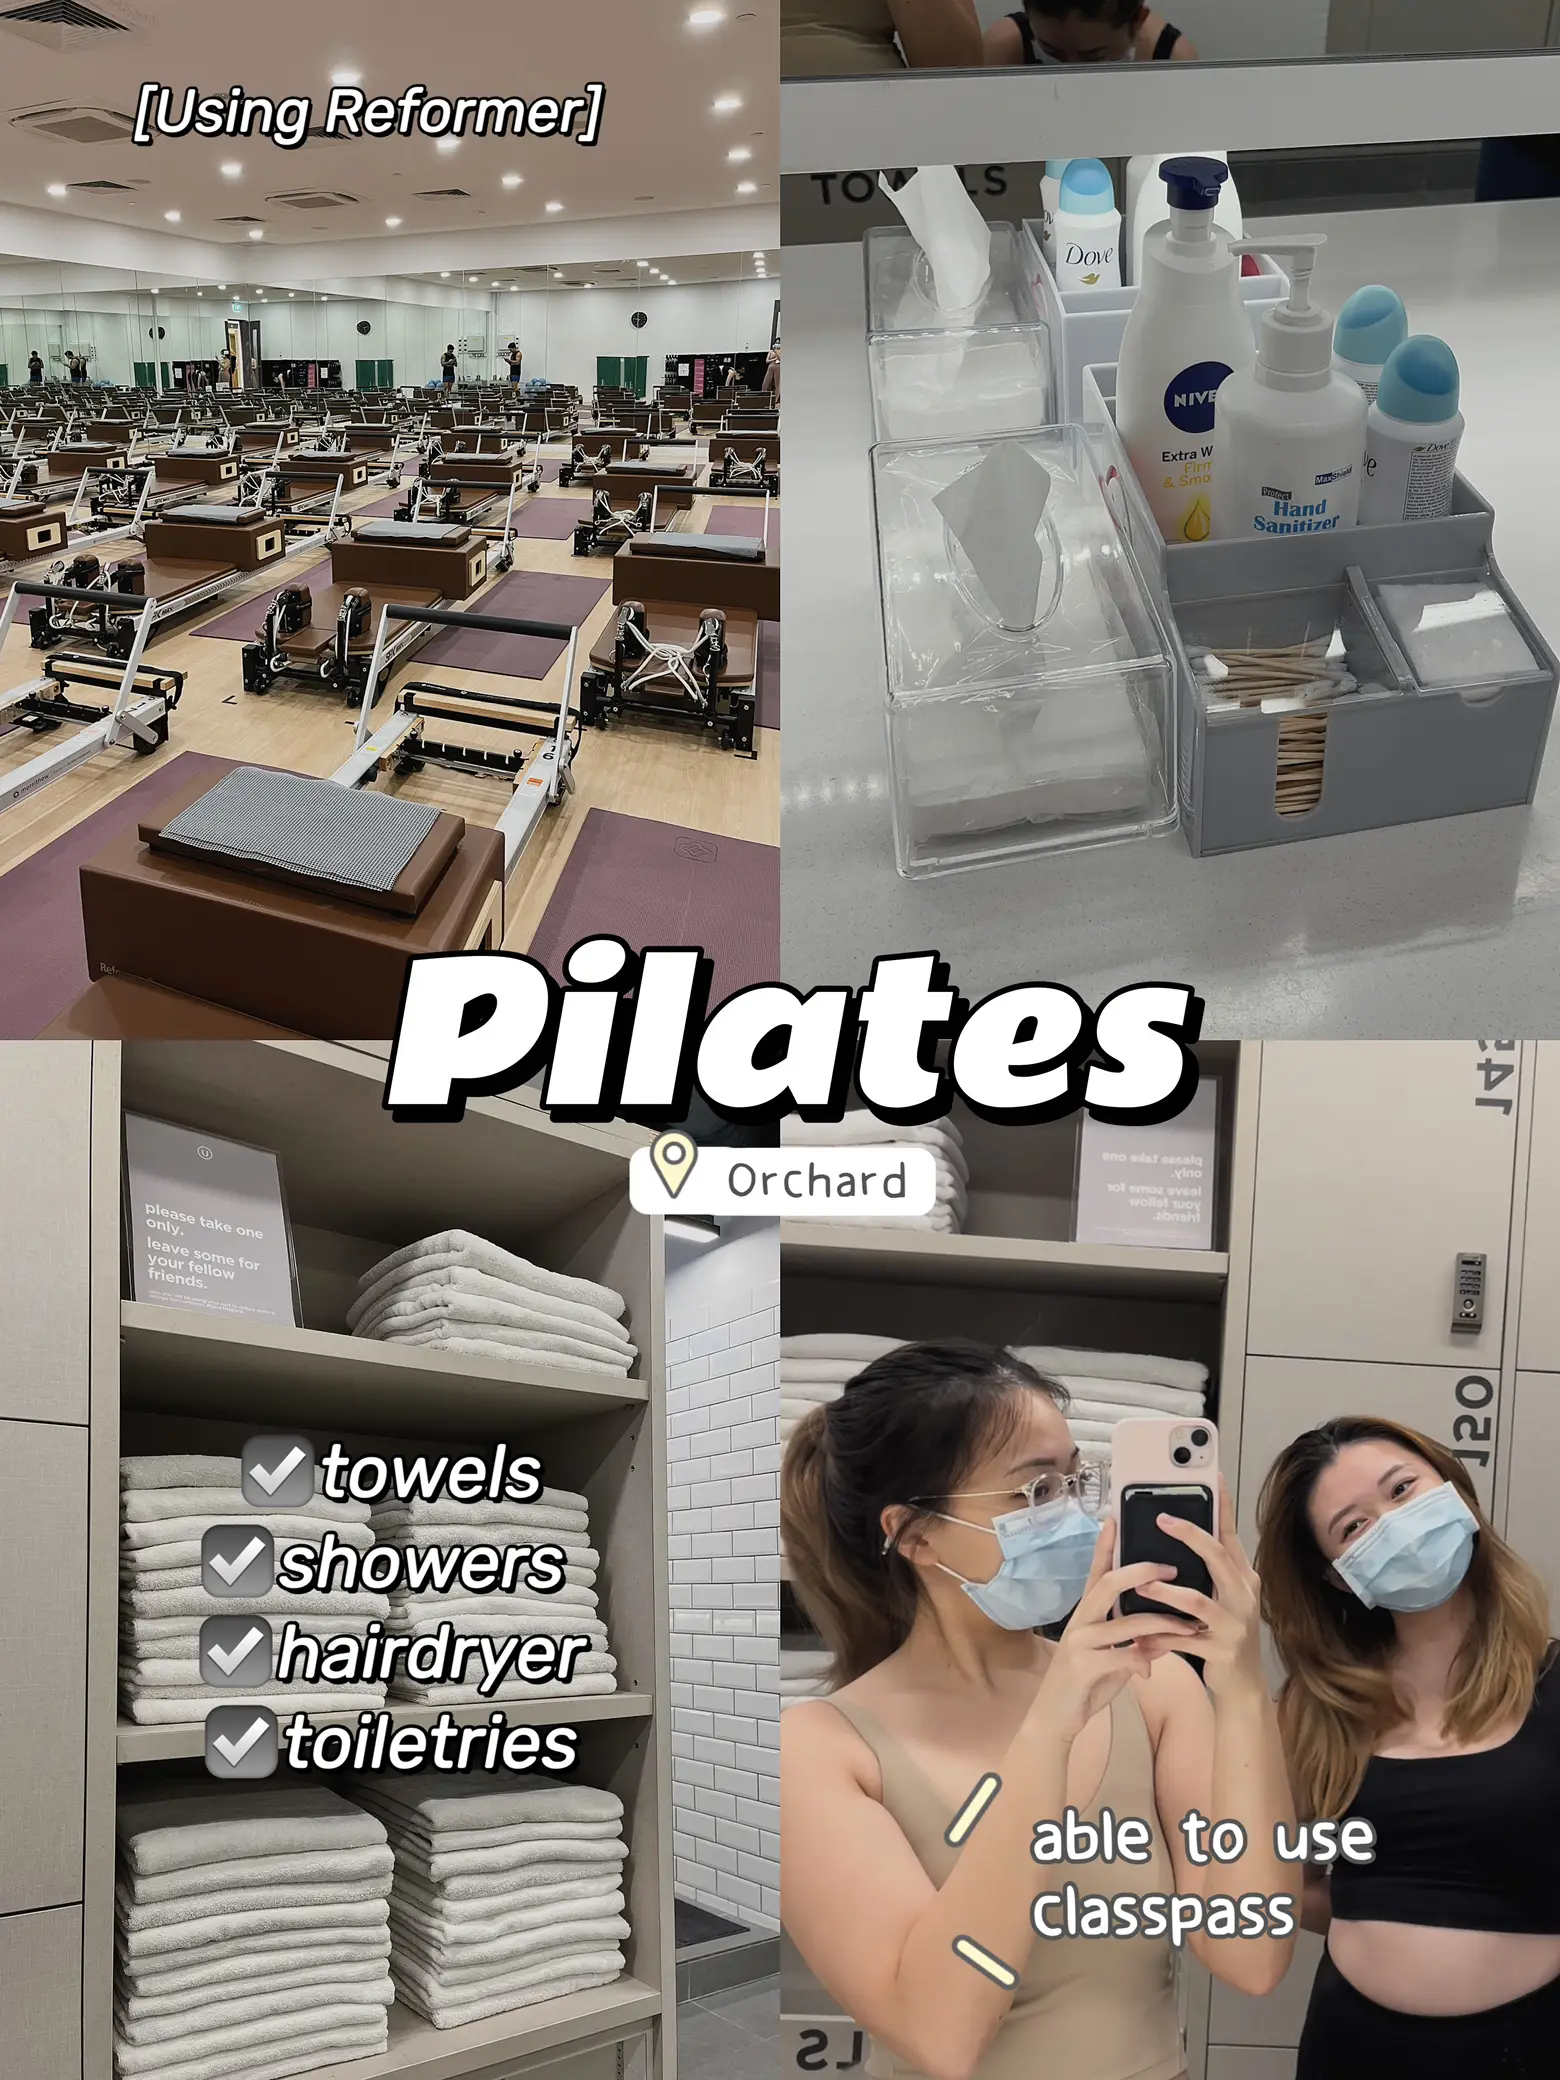 Club Pilates: Read Reviews and Book Classes on ClassPass